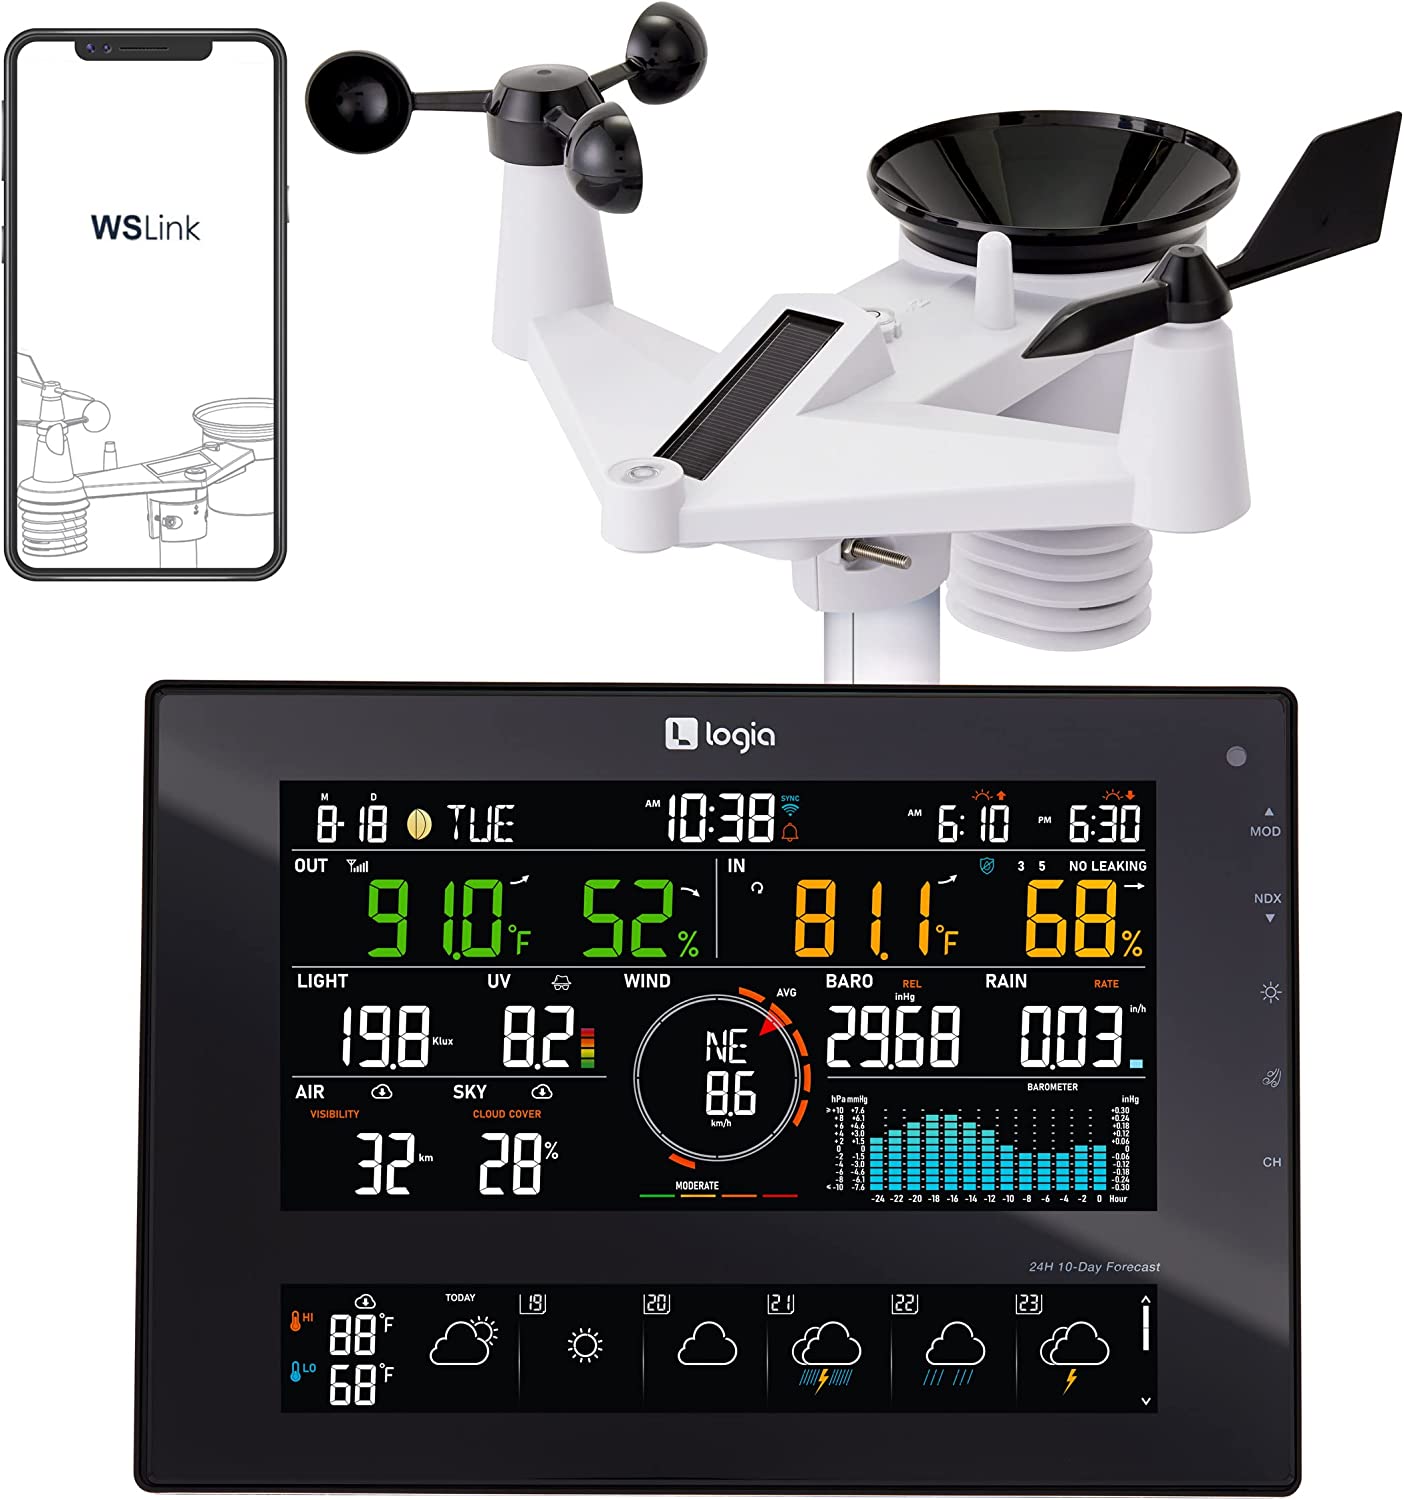 Logia 5-in-1 Wi-Fi Wireless Weather Station with Forecast Data and Alerts for Indoor/Outdoor